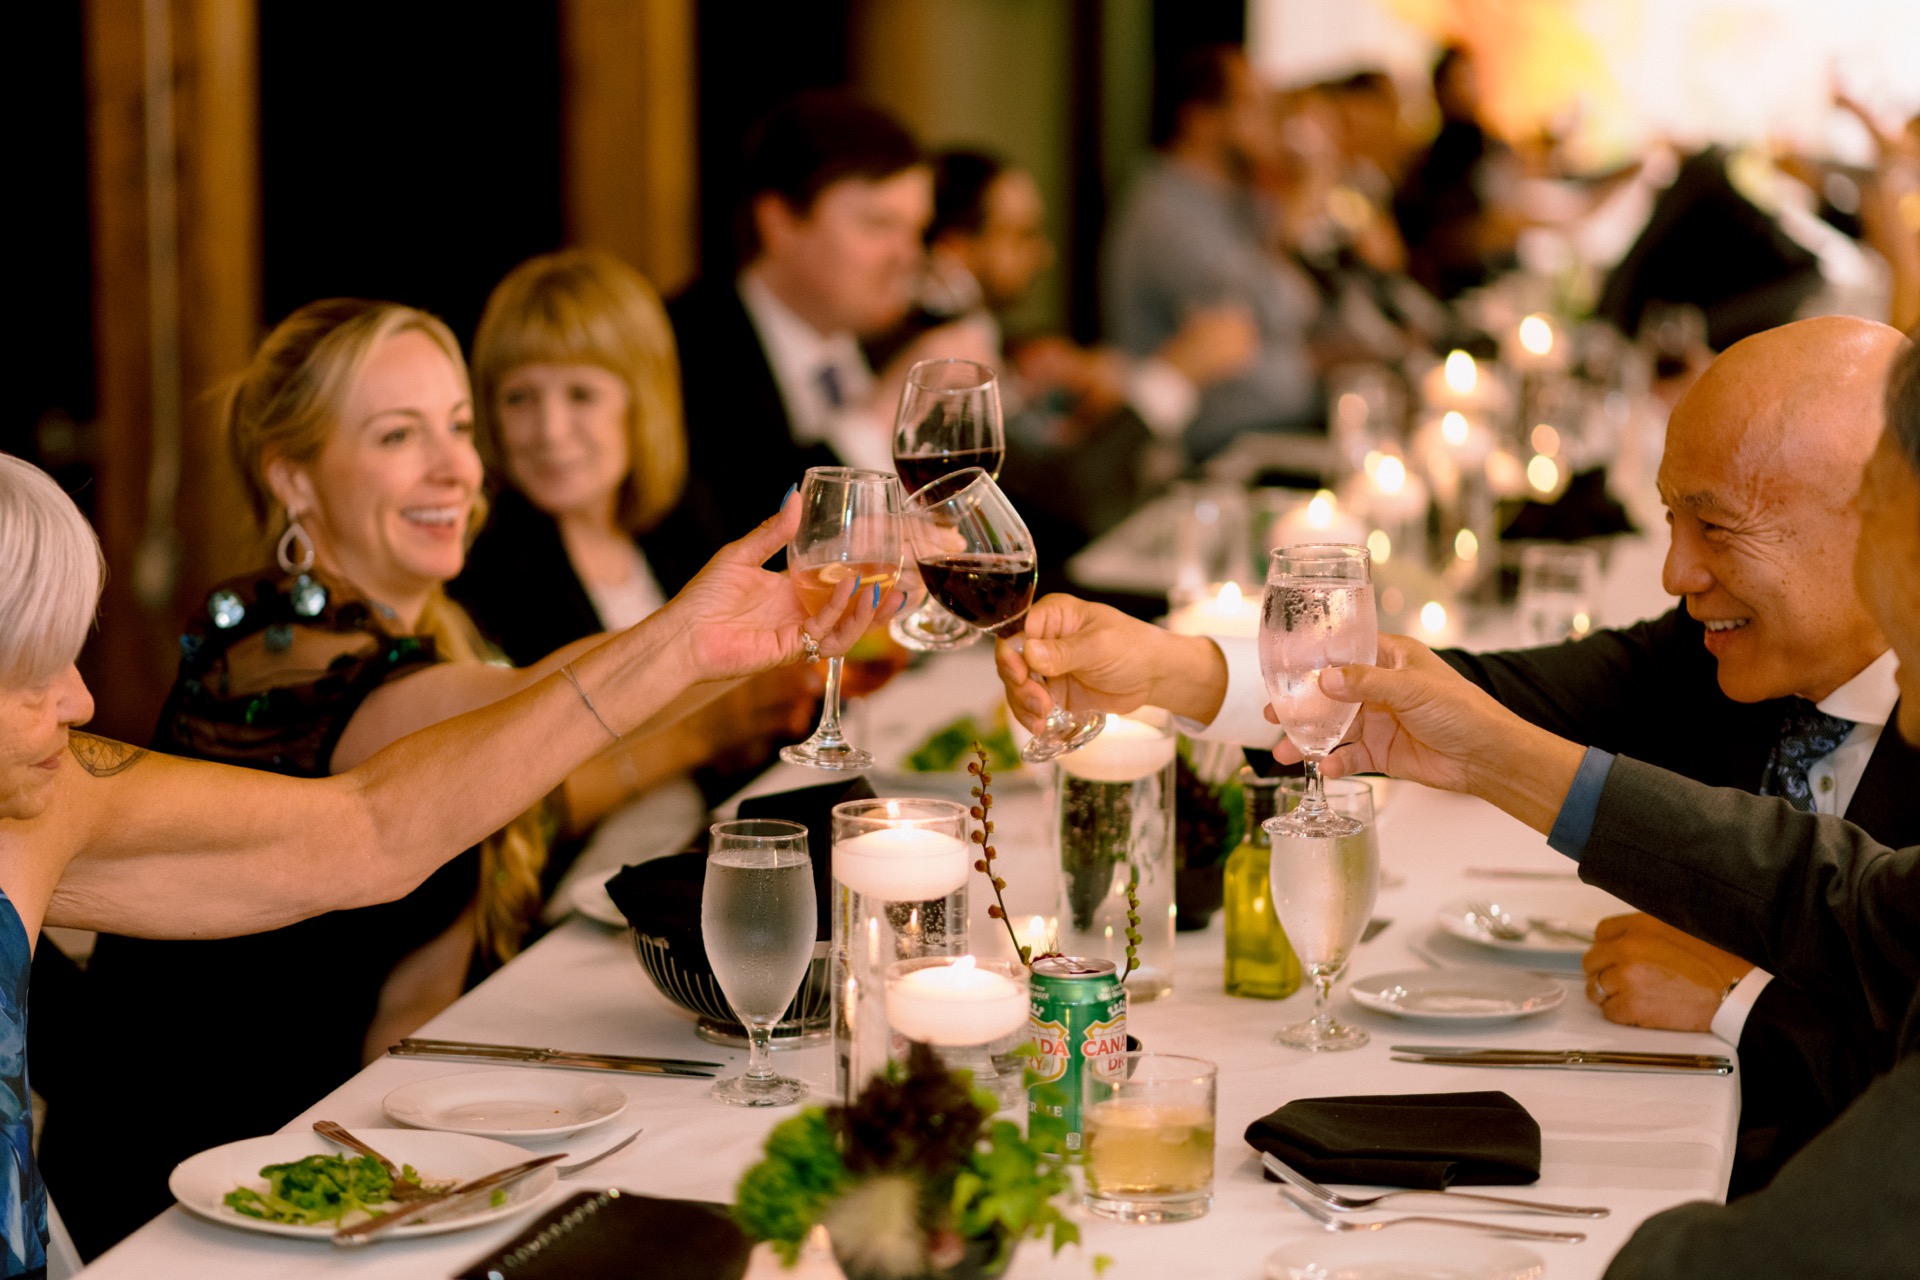 Guests toasting with wine glasses at a wedding